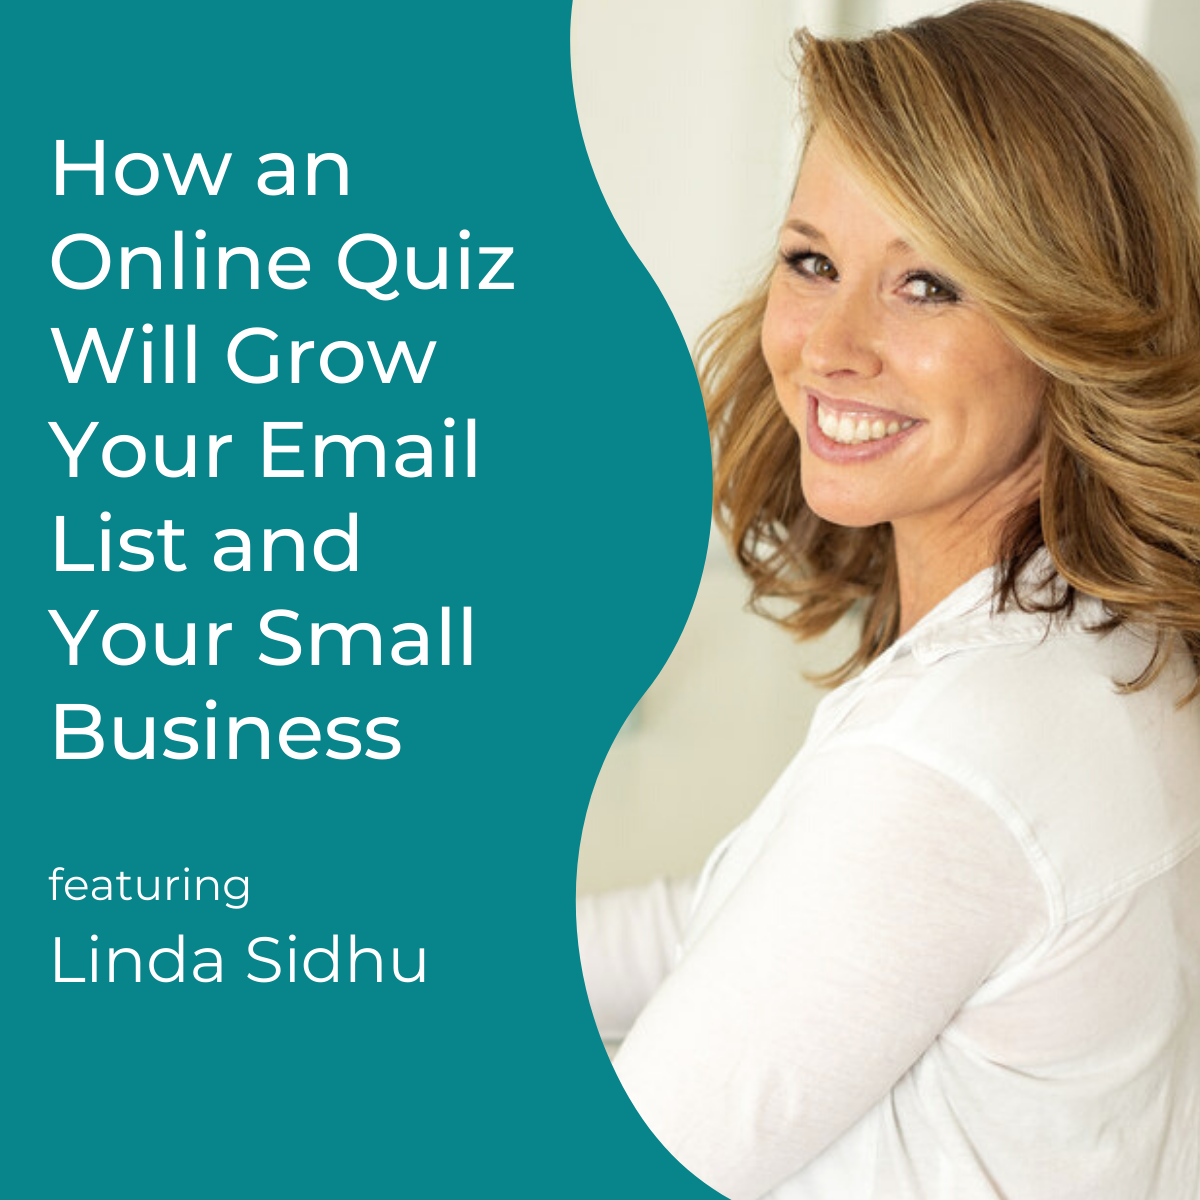 the words "How an Online Quiz Will Grow Your Email List and Your Small Business with Linda Sidhu" on plain background beside a photo of Linda